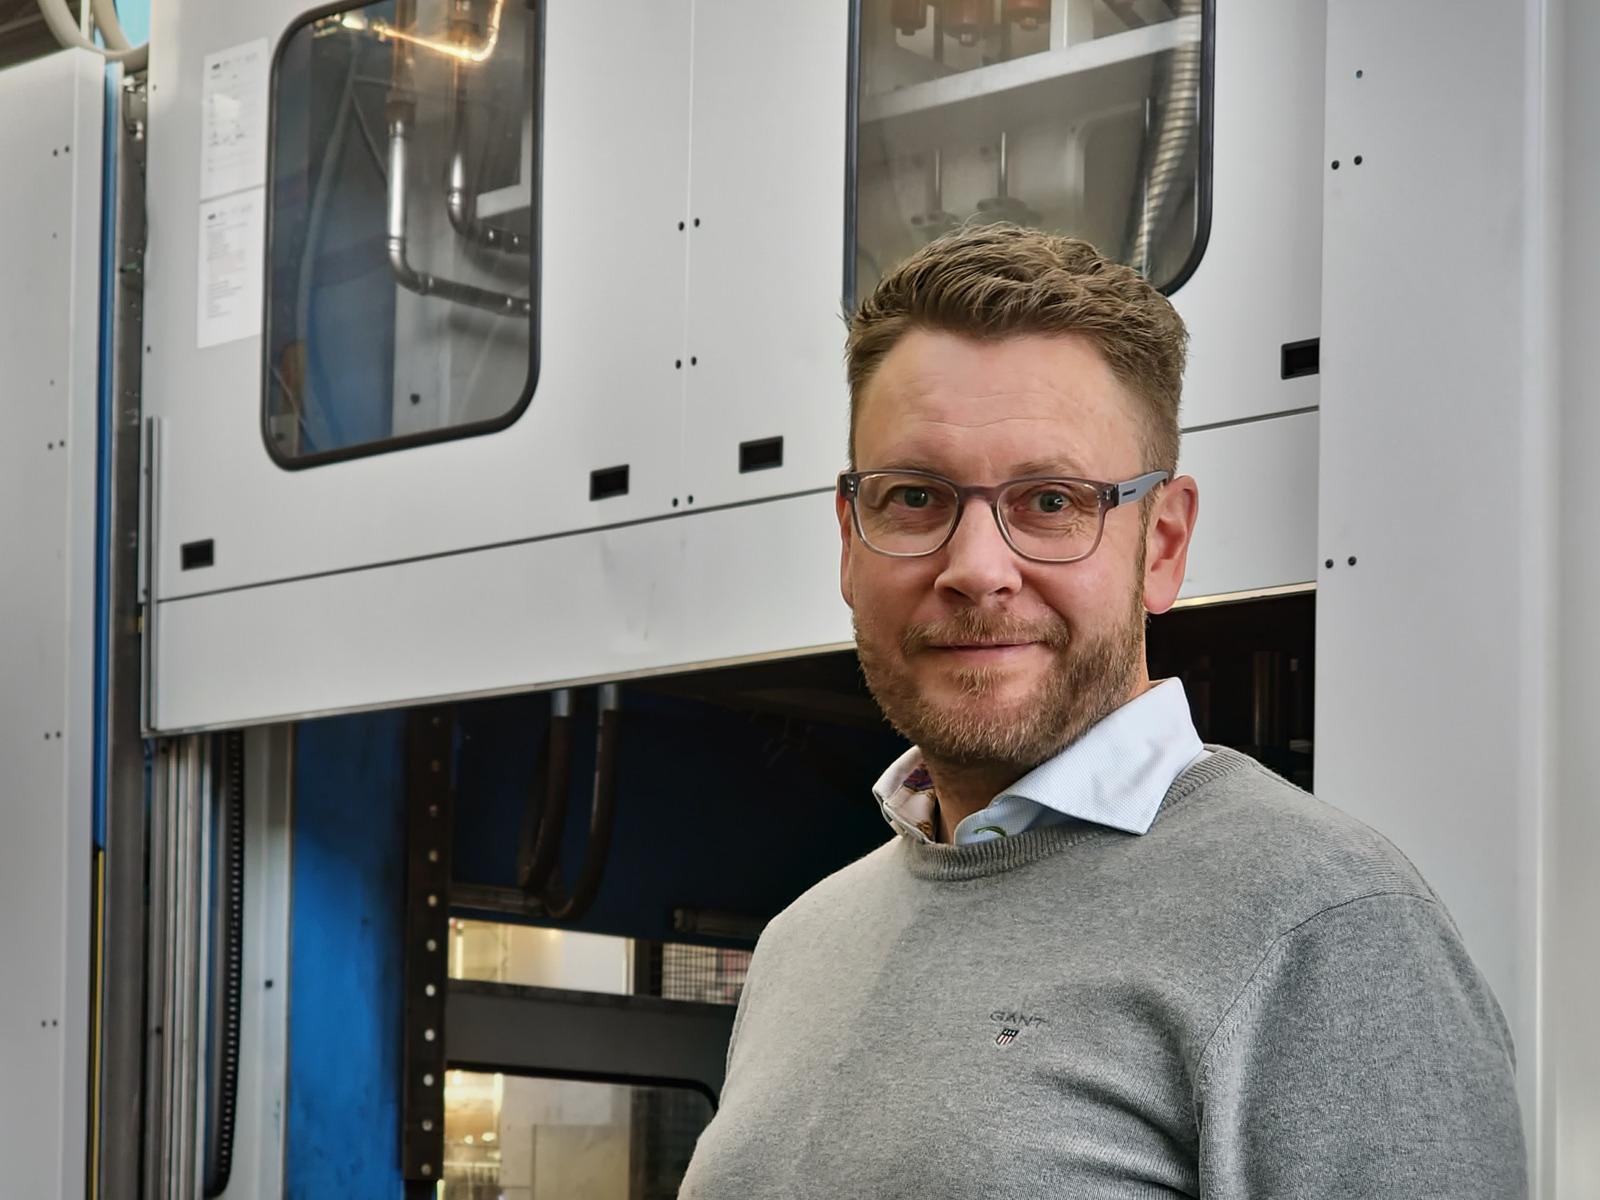 “Choosing one of our factory-rebuilt presses is not only cost-efficient, but also sustainable,” says Andreas Silfversparre, Manager of Rebuilds & Optimization at AP&T.